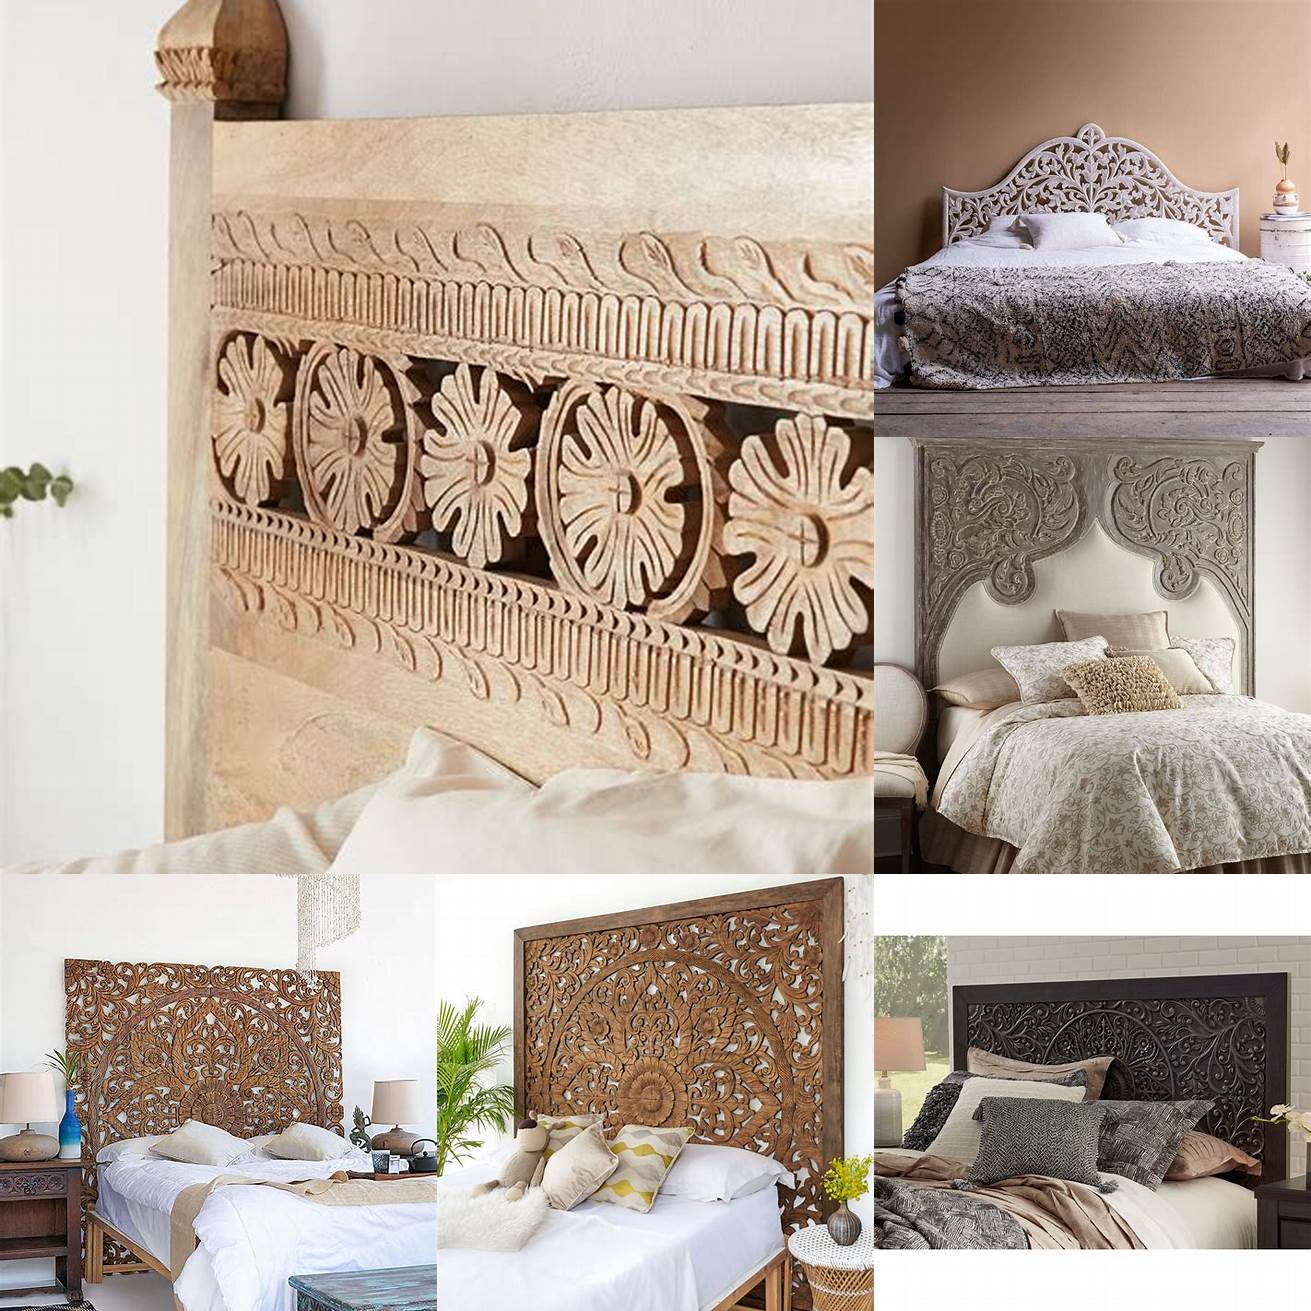 Wooden bedroom set with a carved headboard